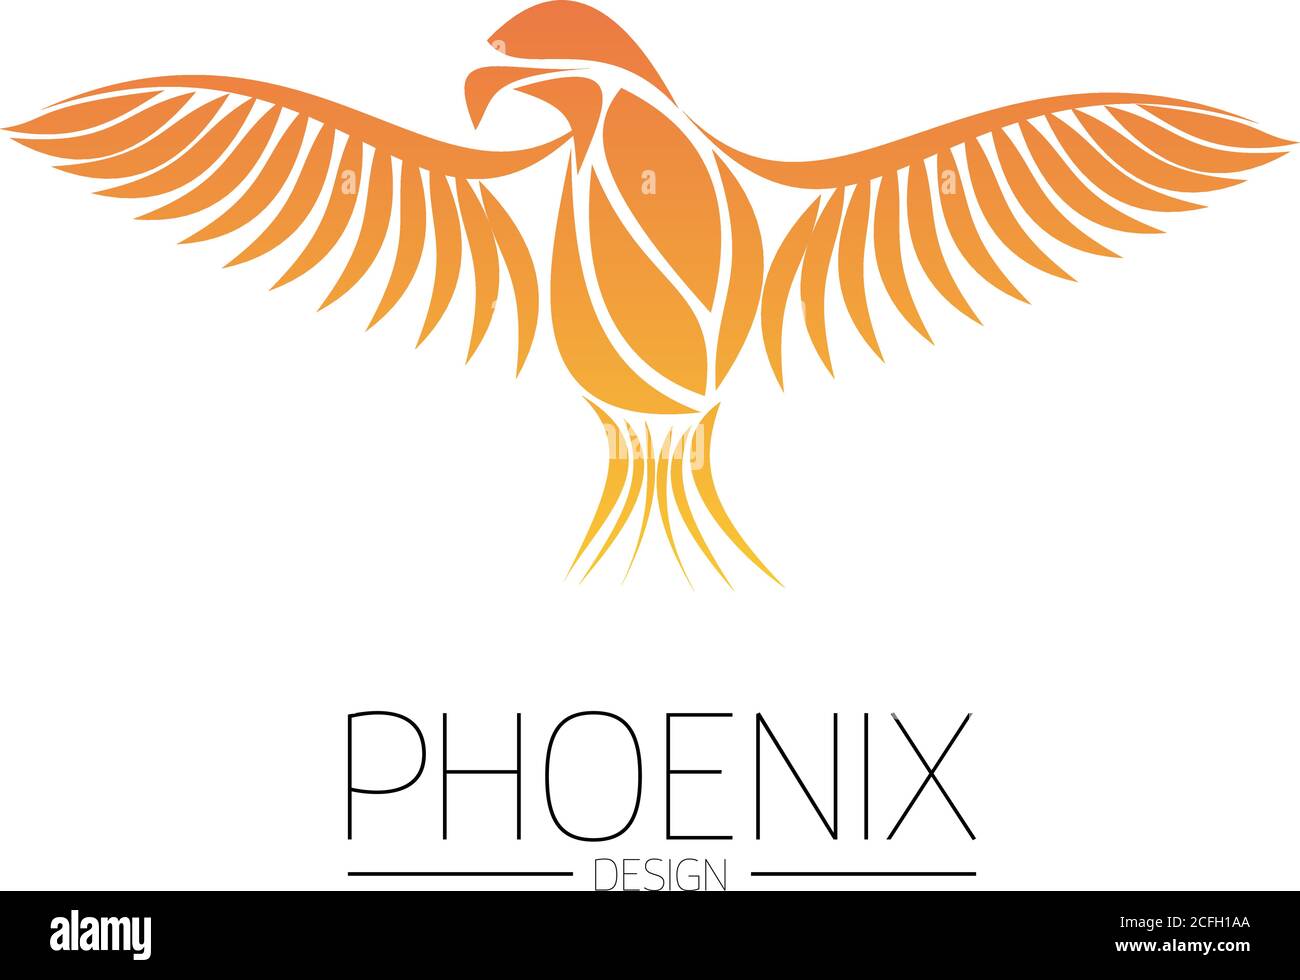 Flaming Phoenix Bird with wide spread wings in the orange fire colors on white background. Symbol of reborn and regeneration. EPS10 vector illustration. Stock Vector